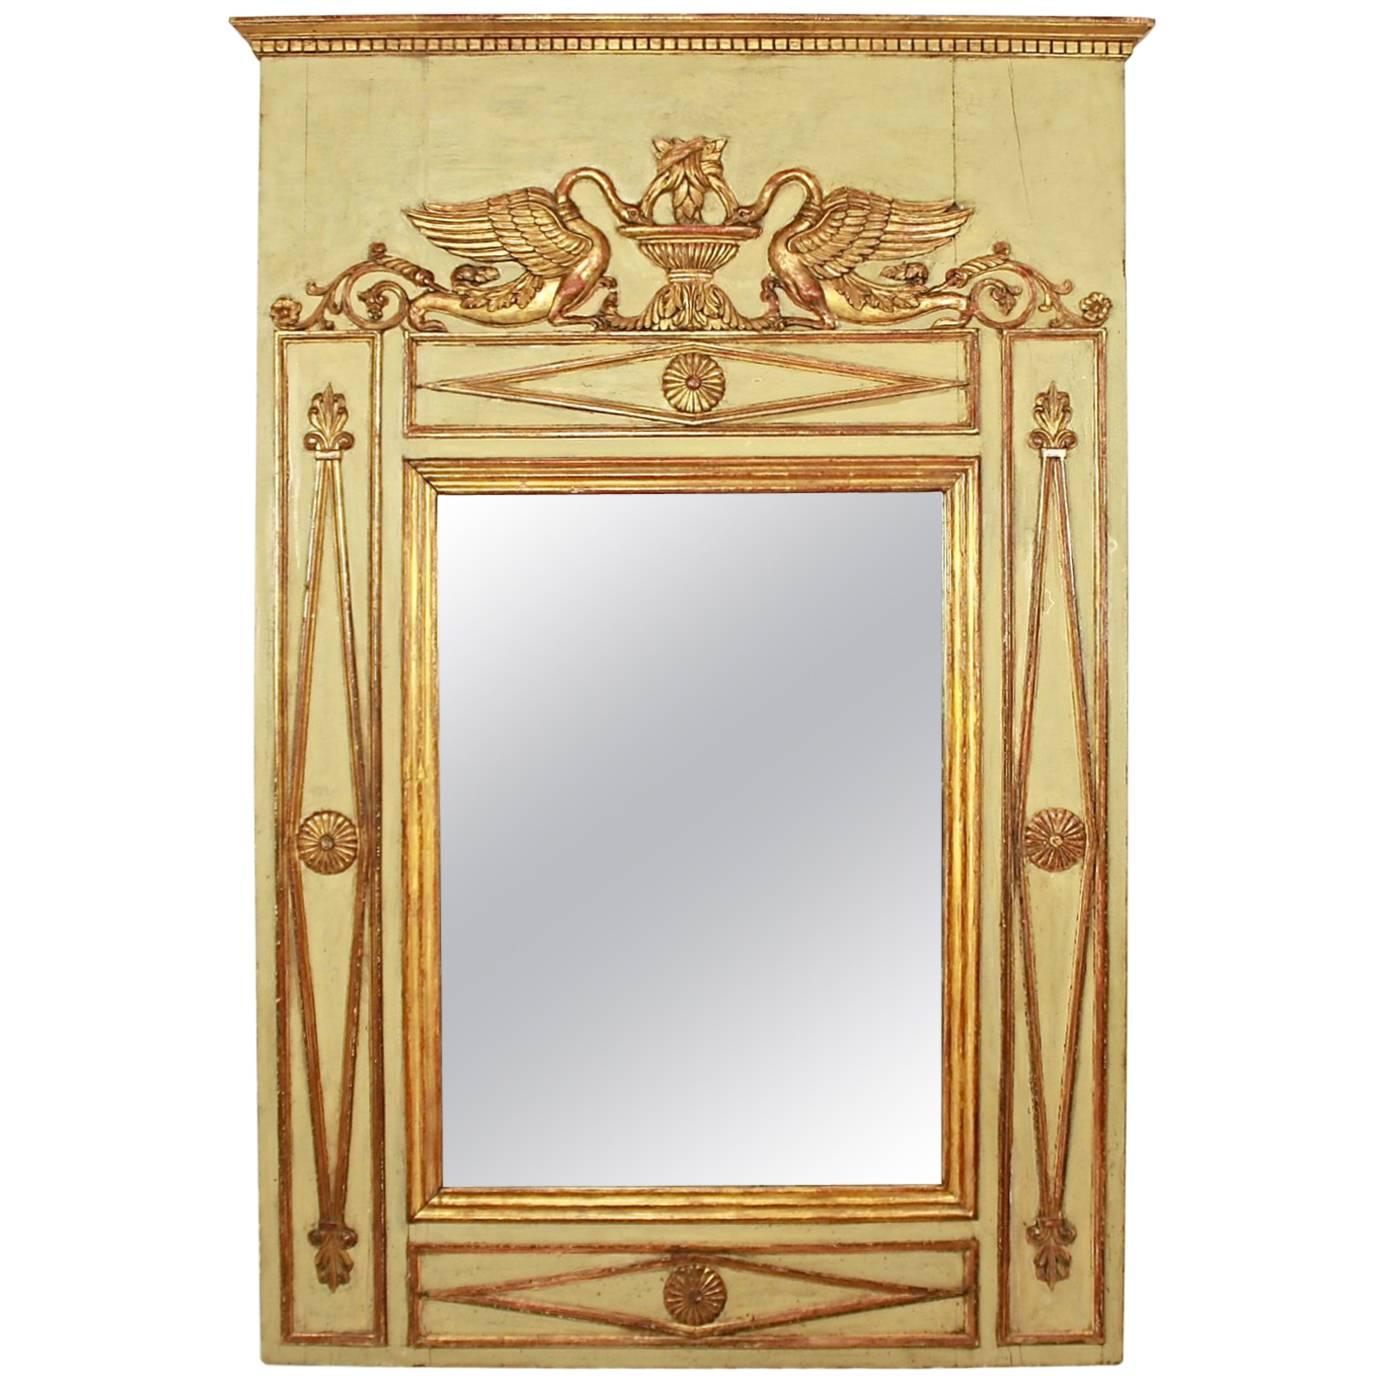 Early Empire Parcel-Gilt and Painted Trumeau Mirror